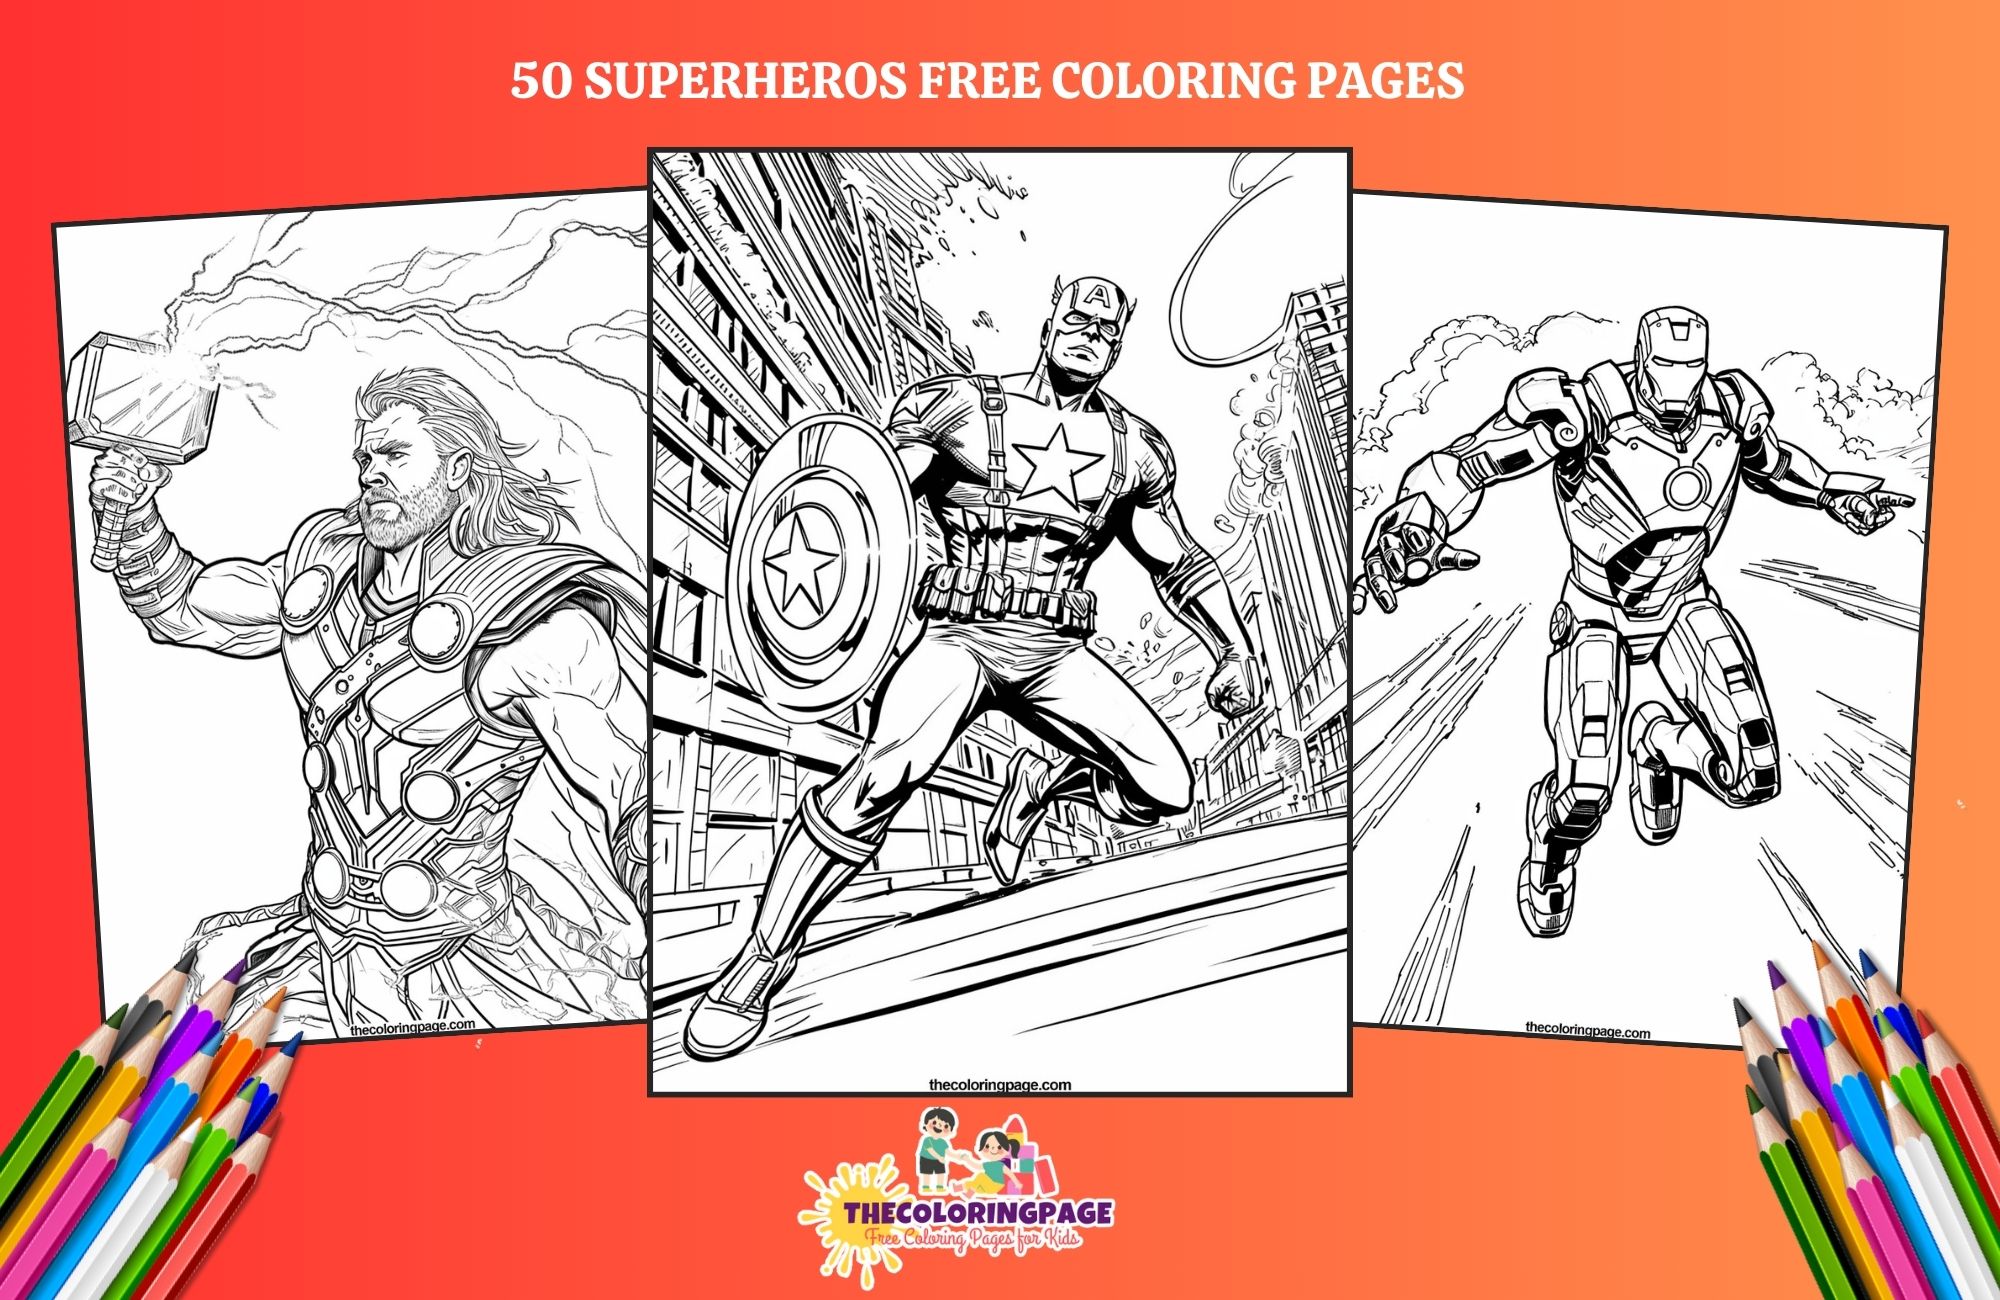 50 Free Superheroes Coloring Pages